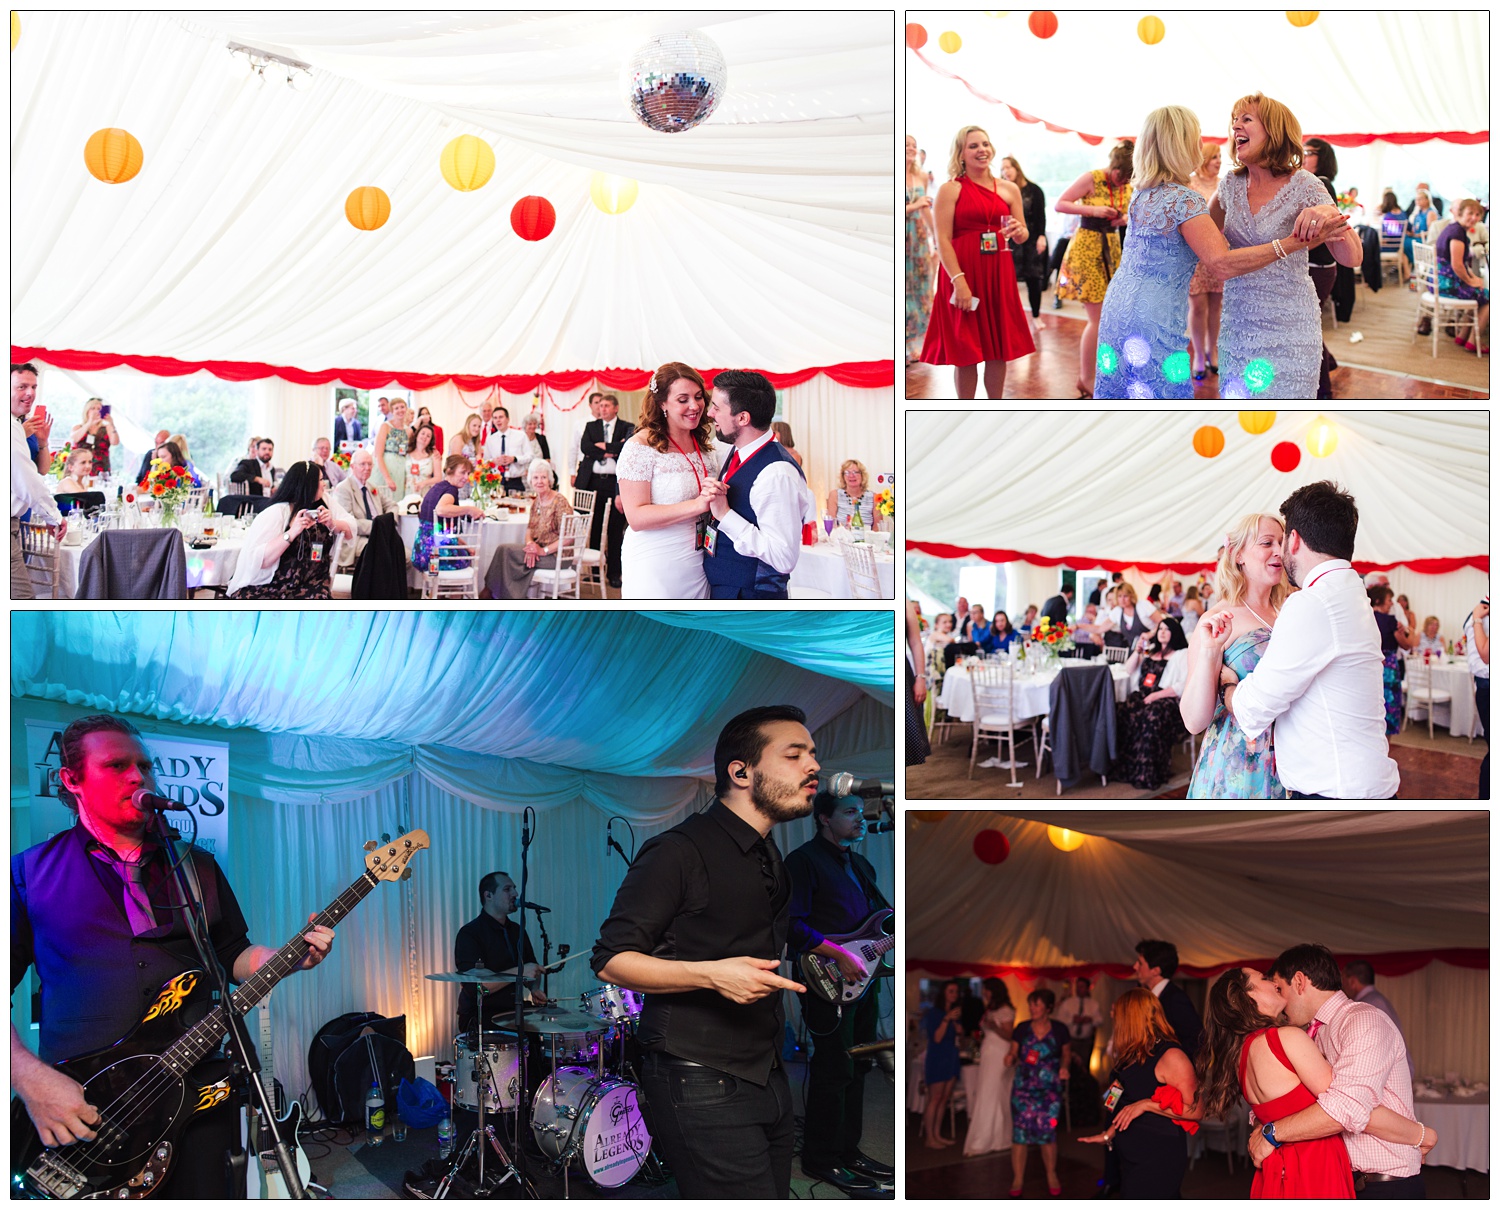 Already Legends band performing at a wedding in a marquee, in Chew Magna. The marquee is decorated with yellow, red, and orange paper lanterns. the couple have their first dance.